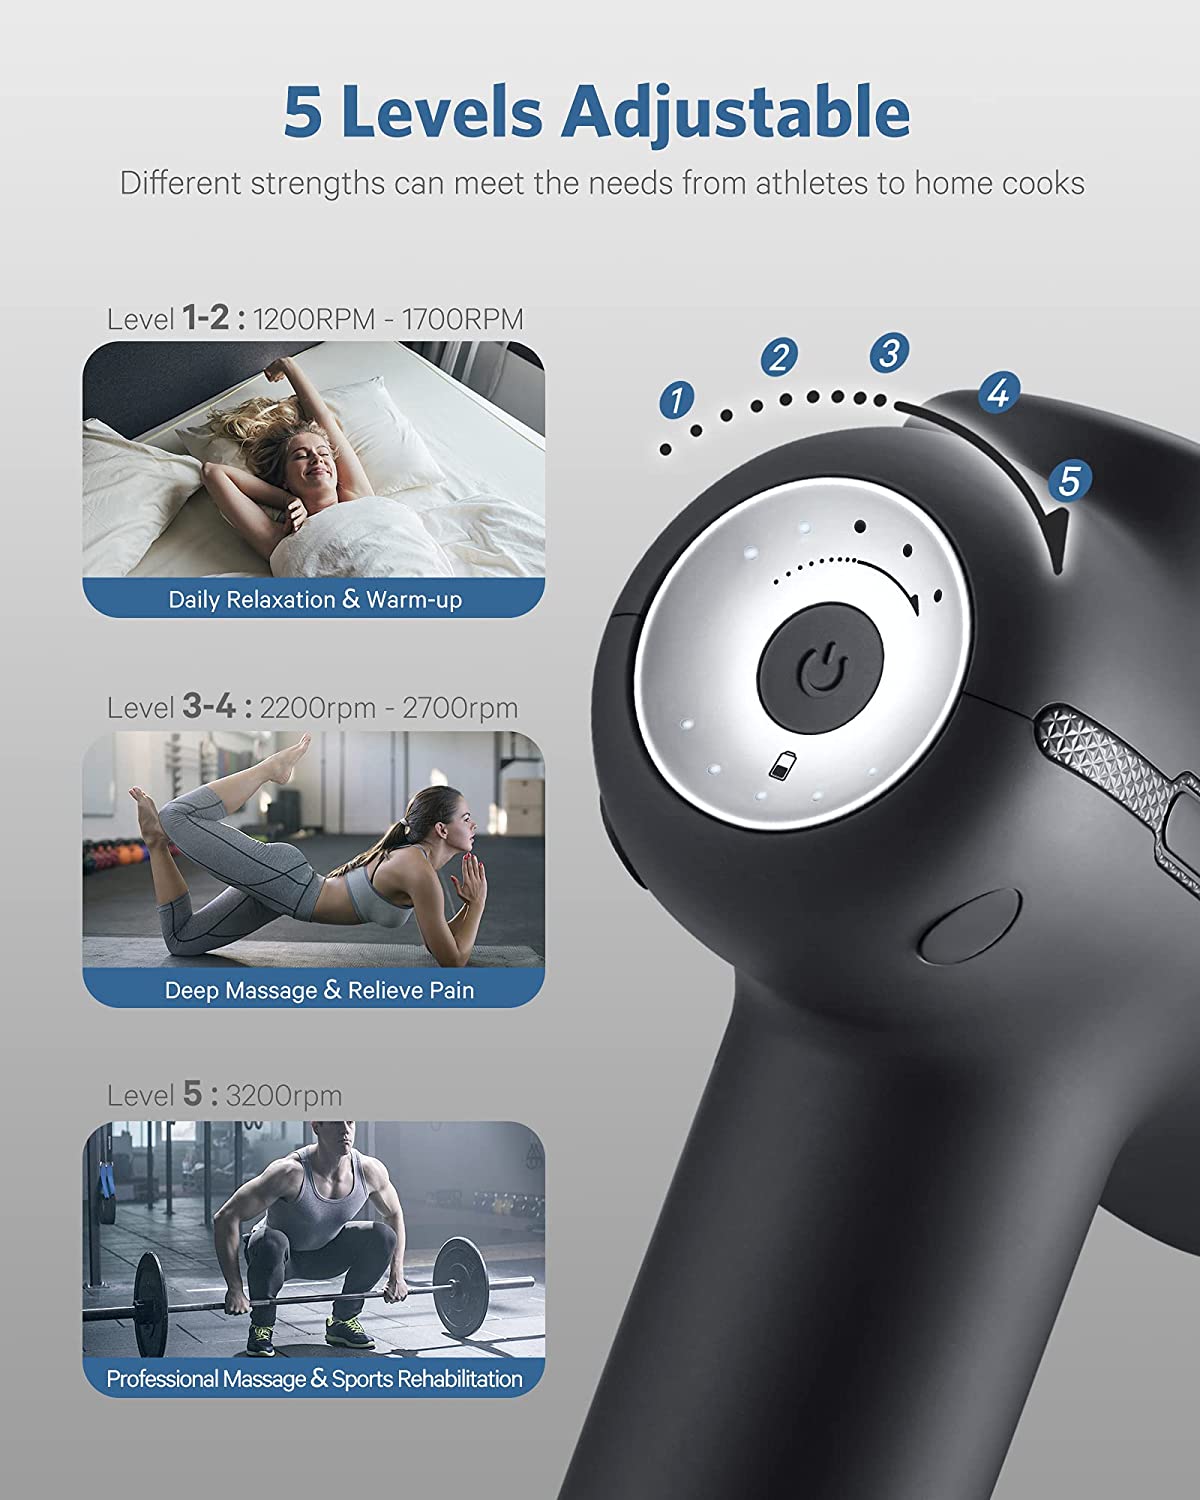 Load image into Gallery viewer, Massage Gun for Athletes, Naipo Handheld Massage Deep Tissue Body Muscle Massage Gun Professional Percussion for Pain Relief Relaxation with 5 Massage Heads Cordless Quiet Portable Carrying Case - NAIPO
